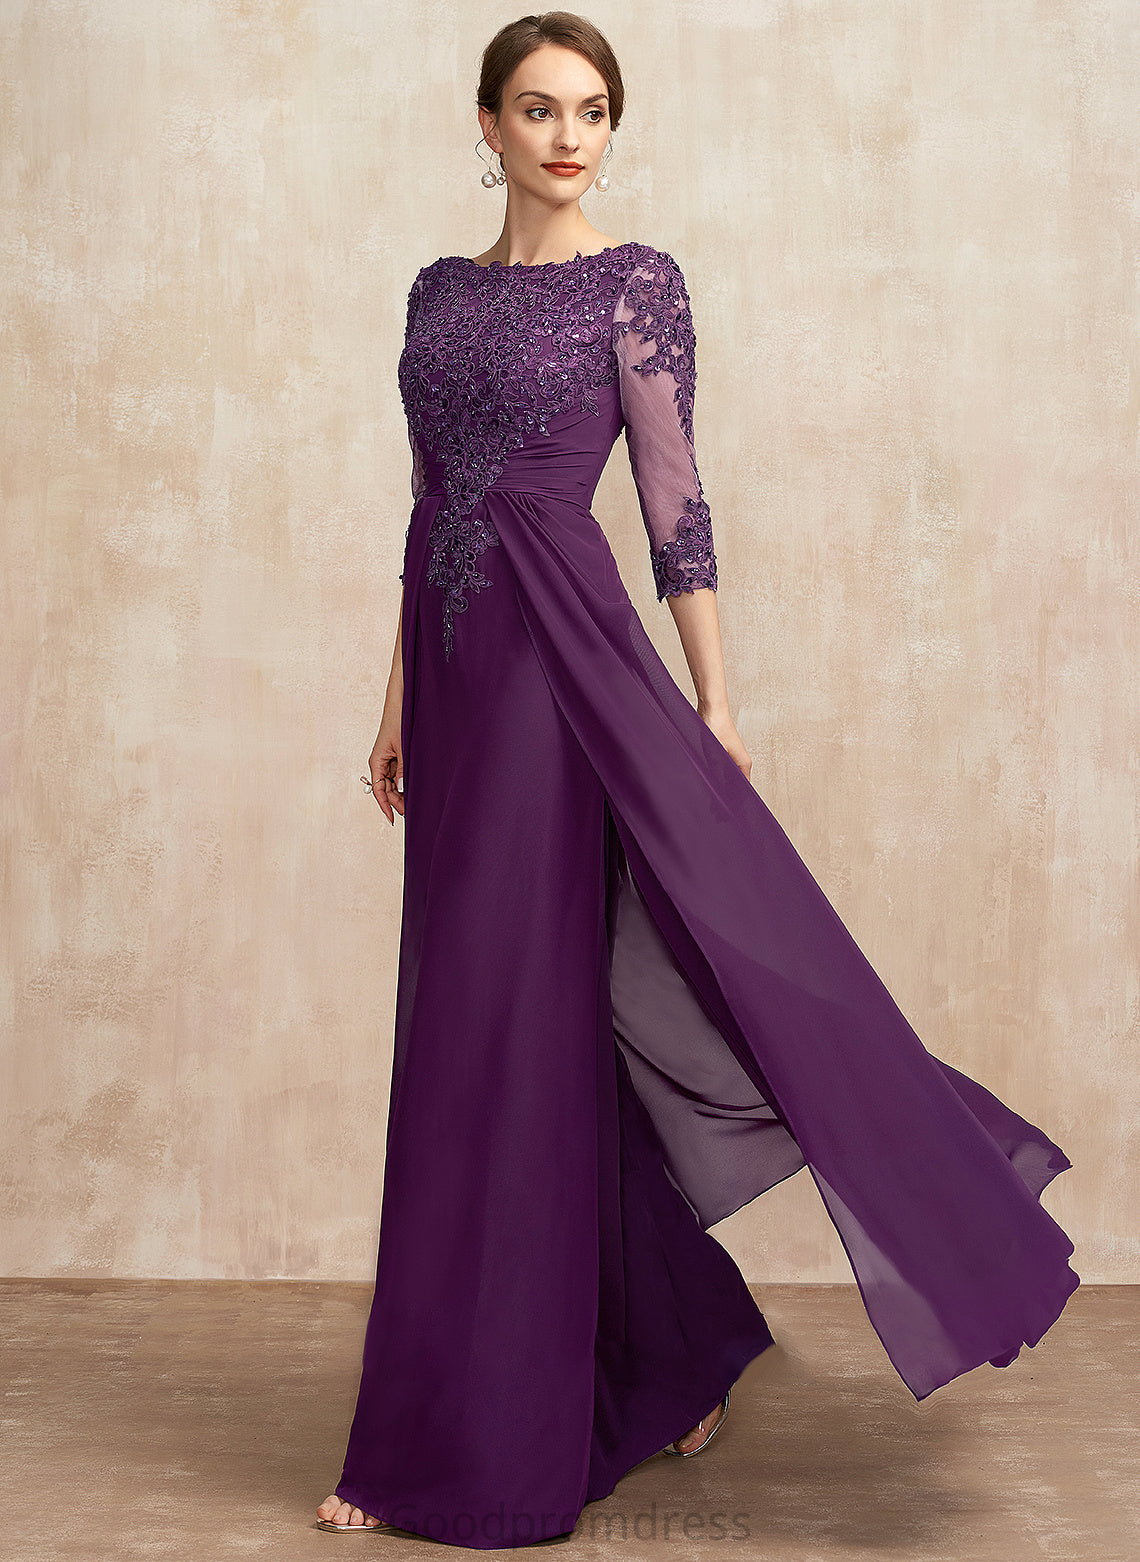 Bride Lace A-Line Dress Mother of the Bride Dresses Makena Neck the Scoop Floor-Length of Beading With Chiffon Mother Sequins